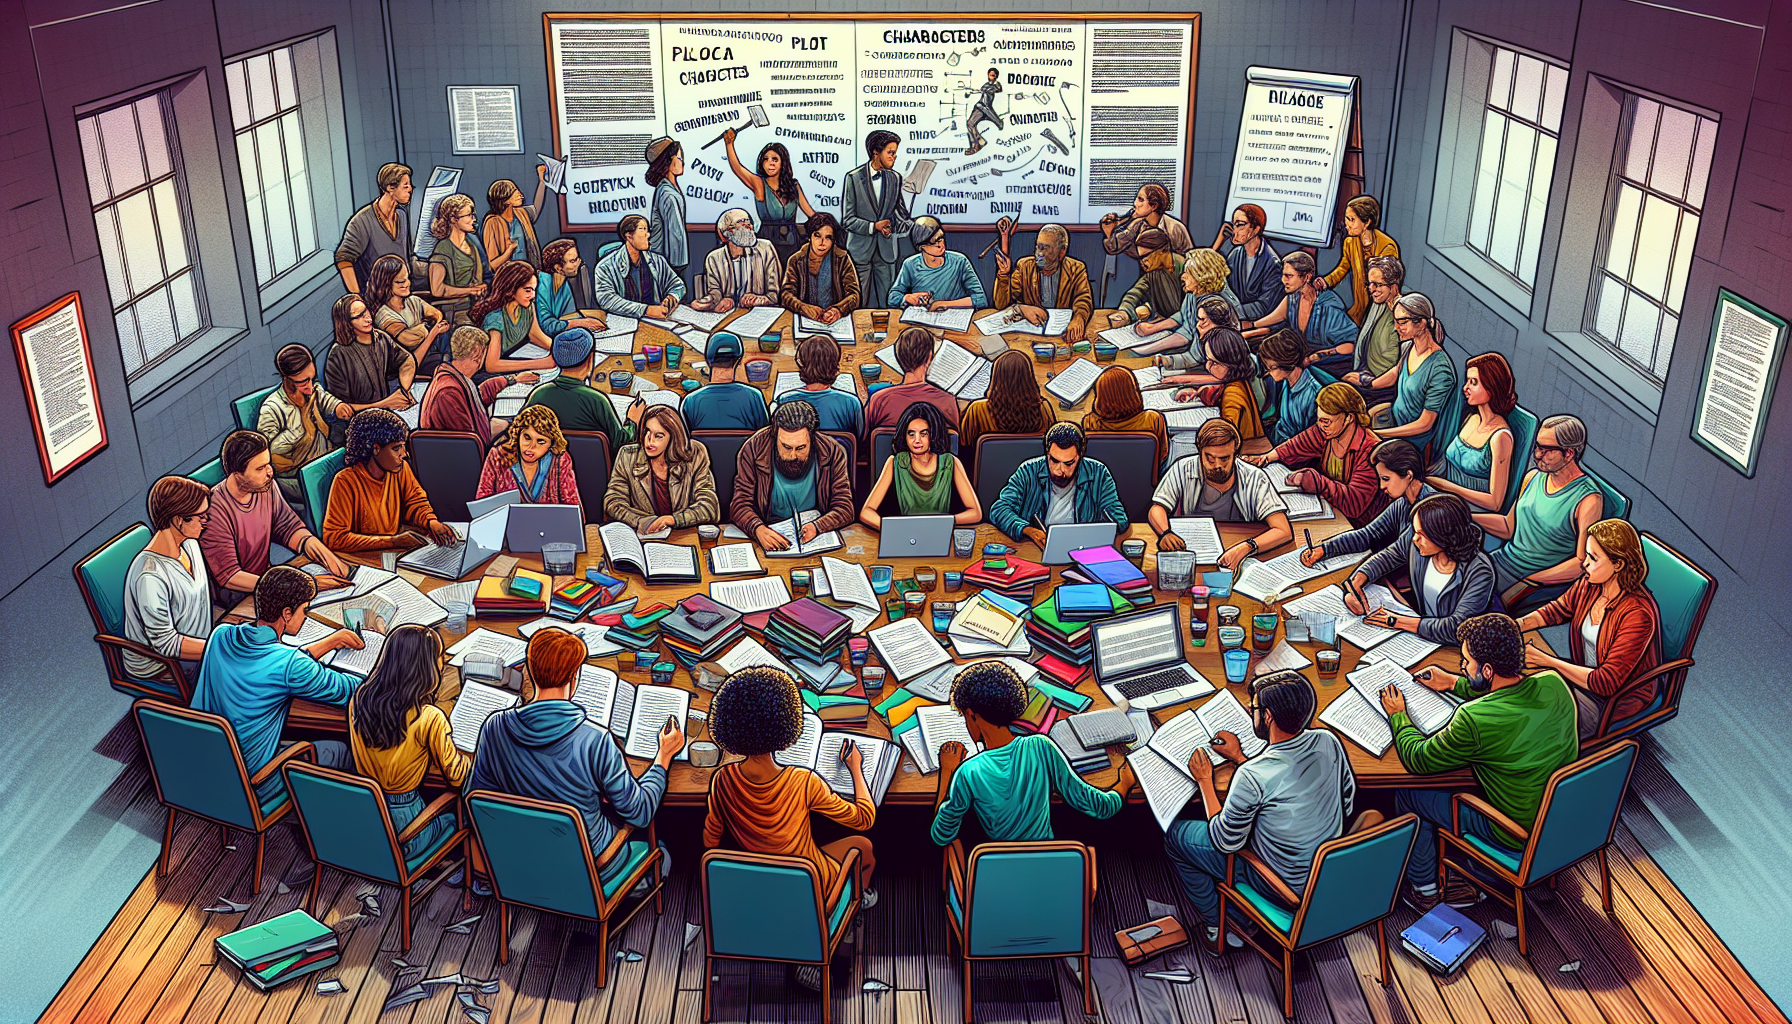 An artful image showcasing a diverse group of aspiring screenwriters, gathered around a large table cluttered with notebooks, laptops, and screenplay drafts. Some students are actively writing, while others are engaged in deep discussion. The setting is a modern classroom with a whiteboard displaying key screenplay elements like 'plot,' 'characters,' and 'dialogue.' The atmosphere should convey enthusiasm, creativity, and collaboration.